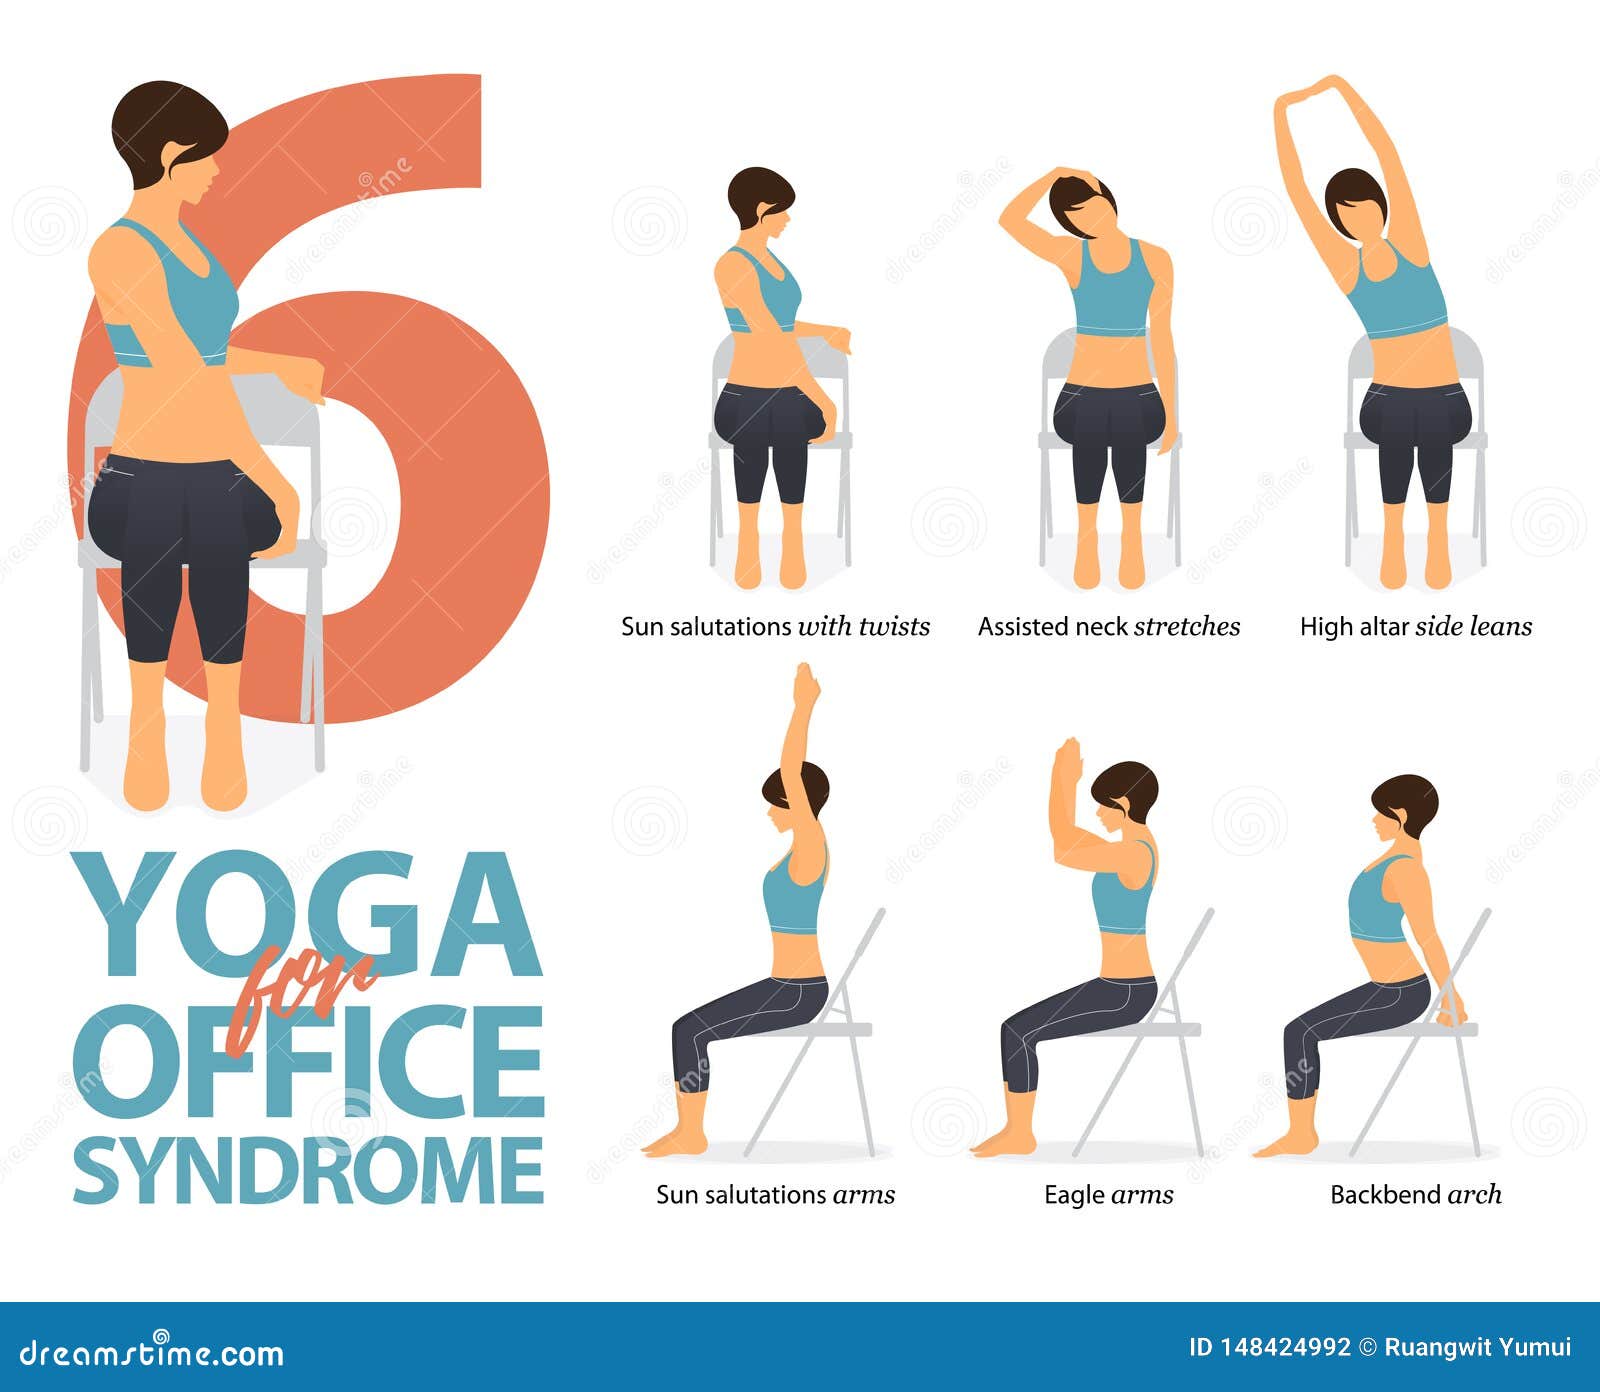 5 Office Yoga Poses to workout at your Office Desk | More About Yoga